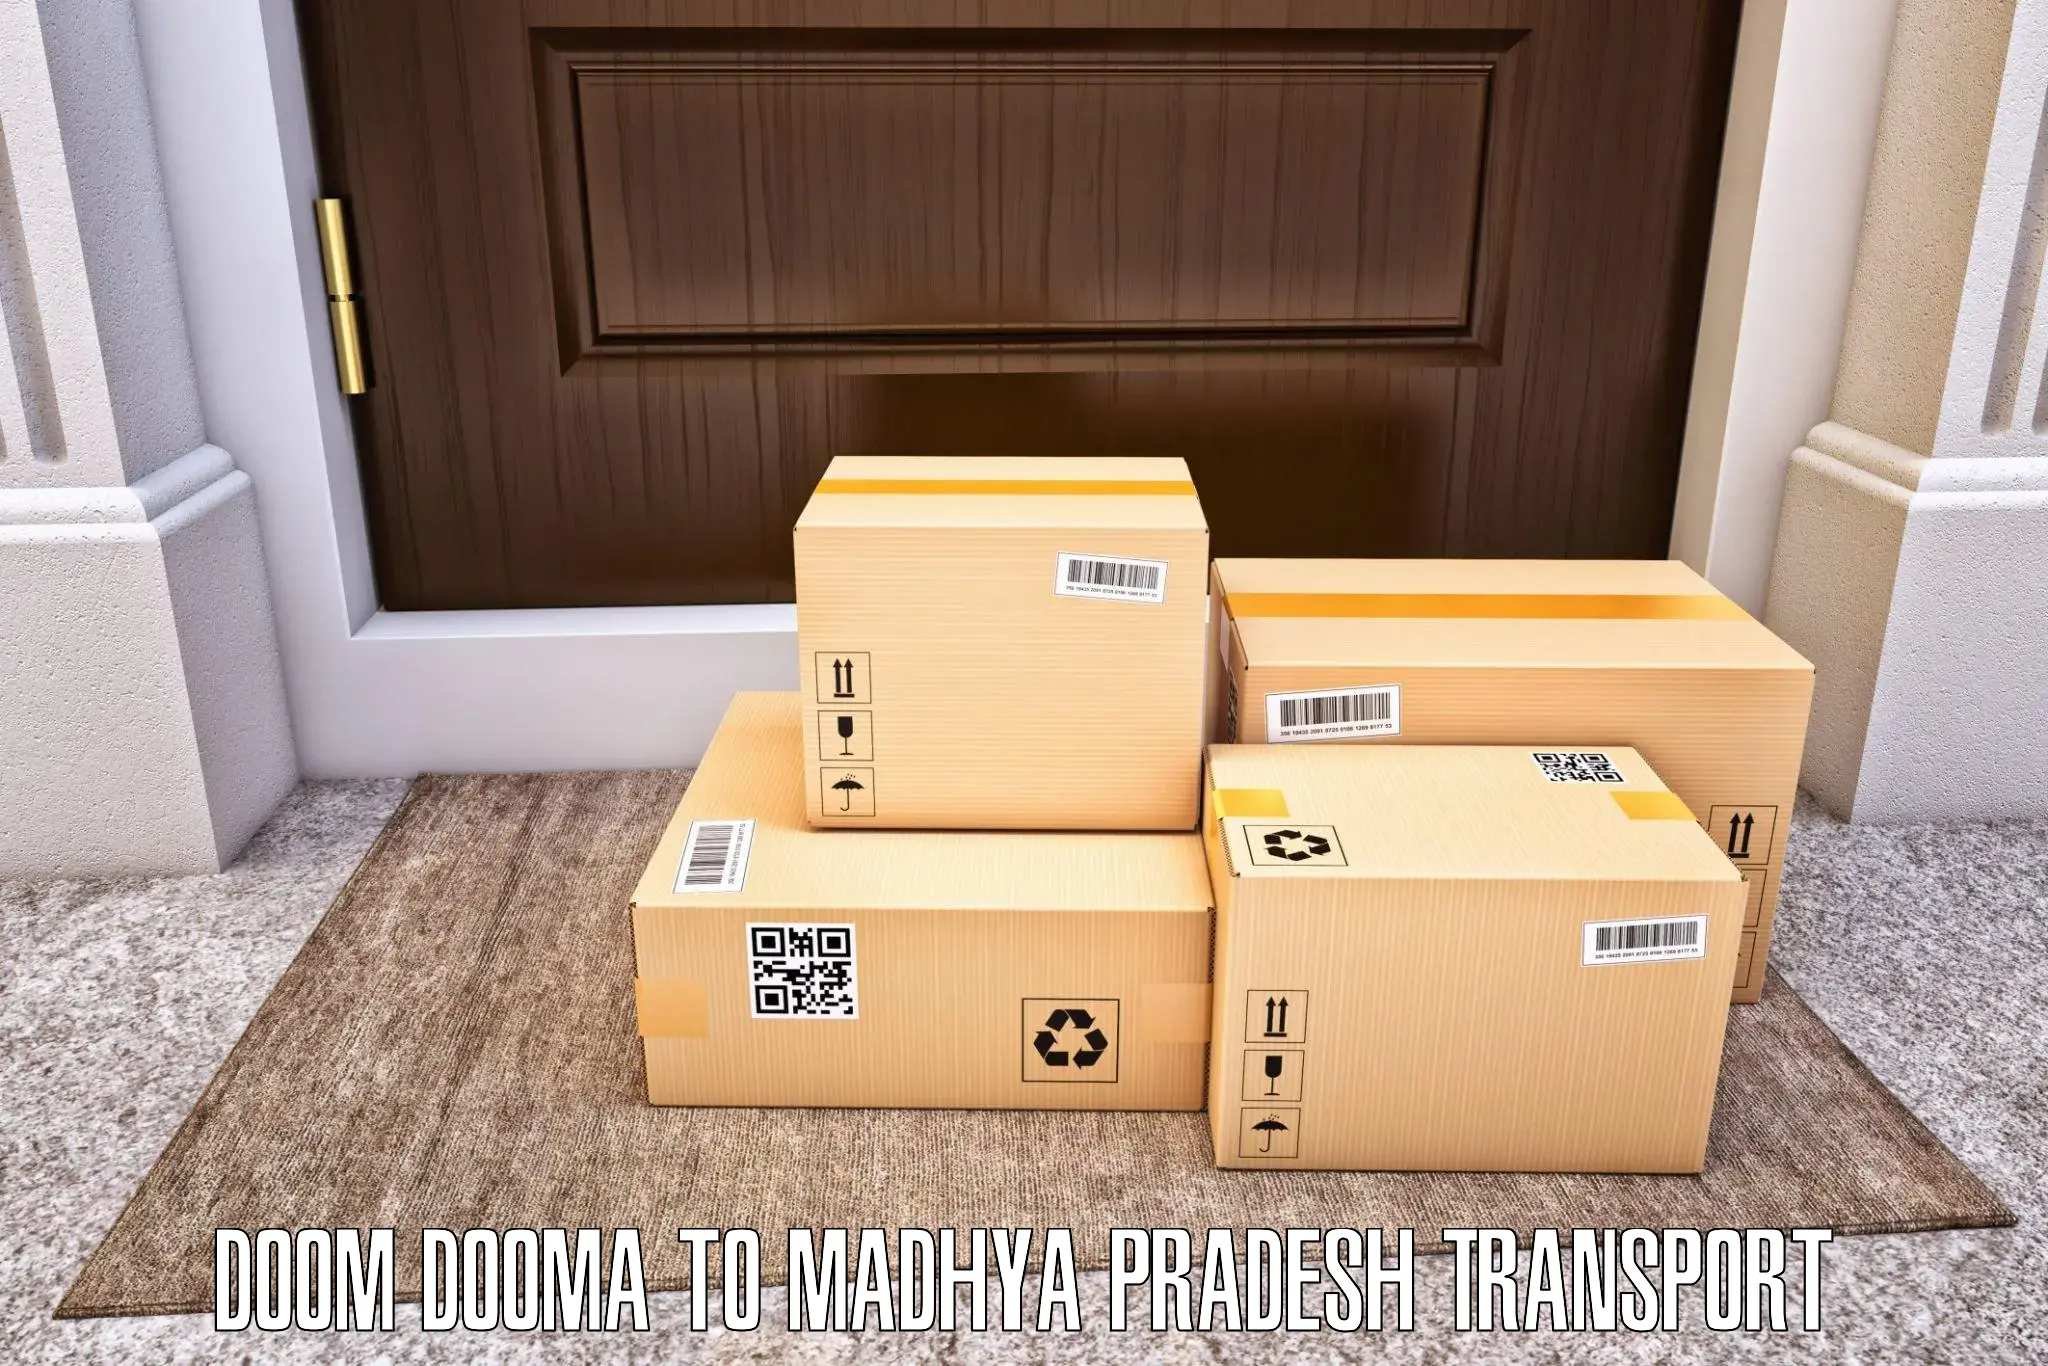 Scooty transport charges Doom Dooma to Lahar